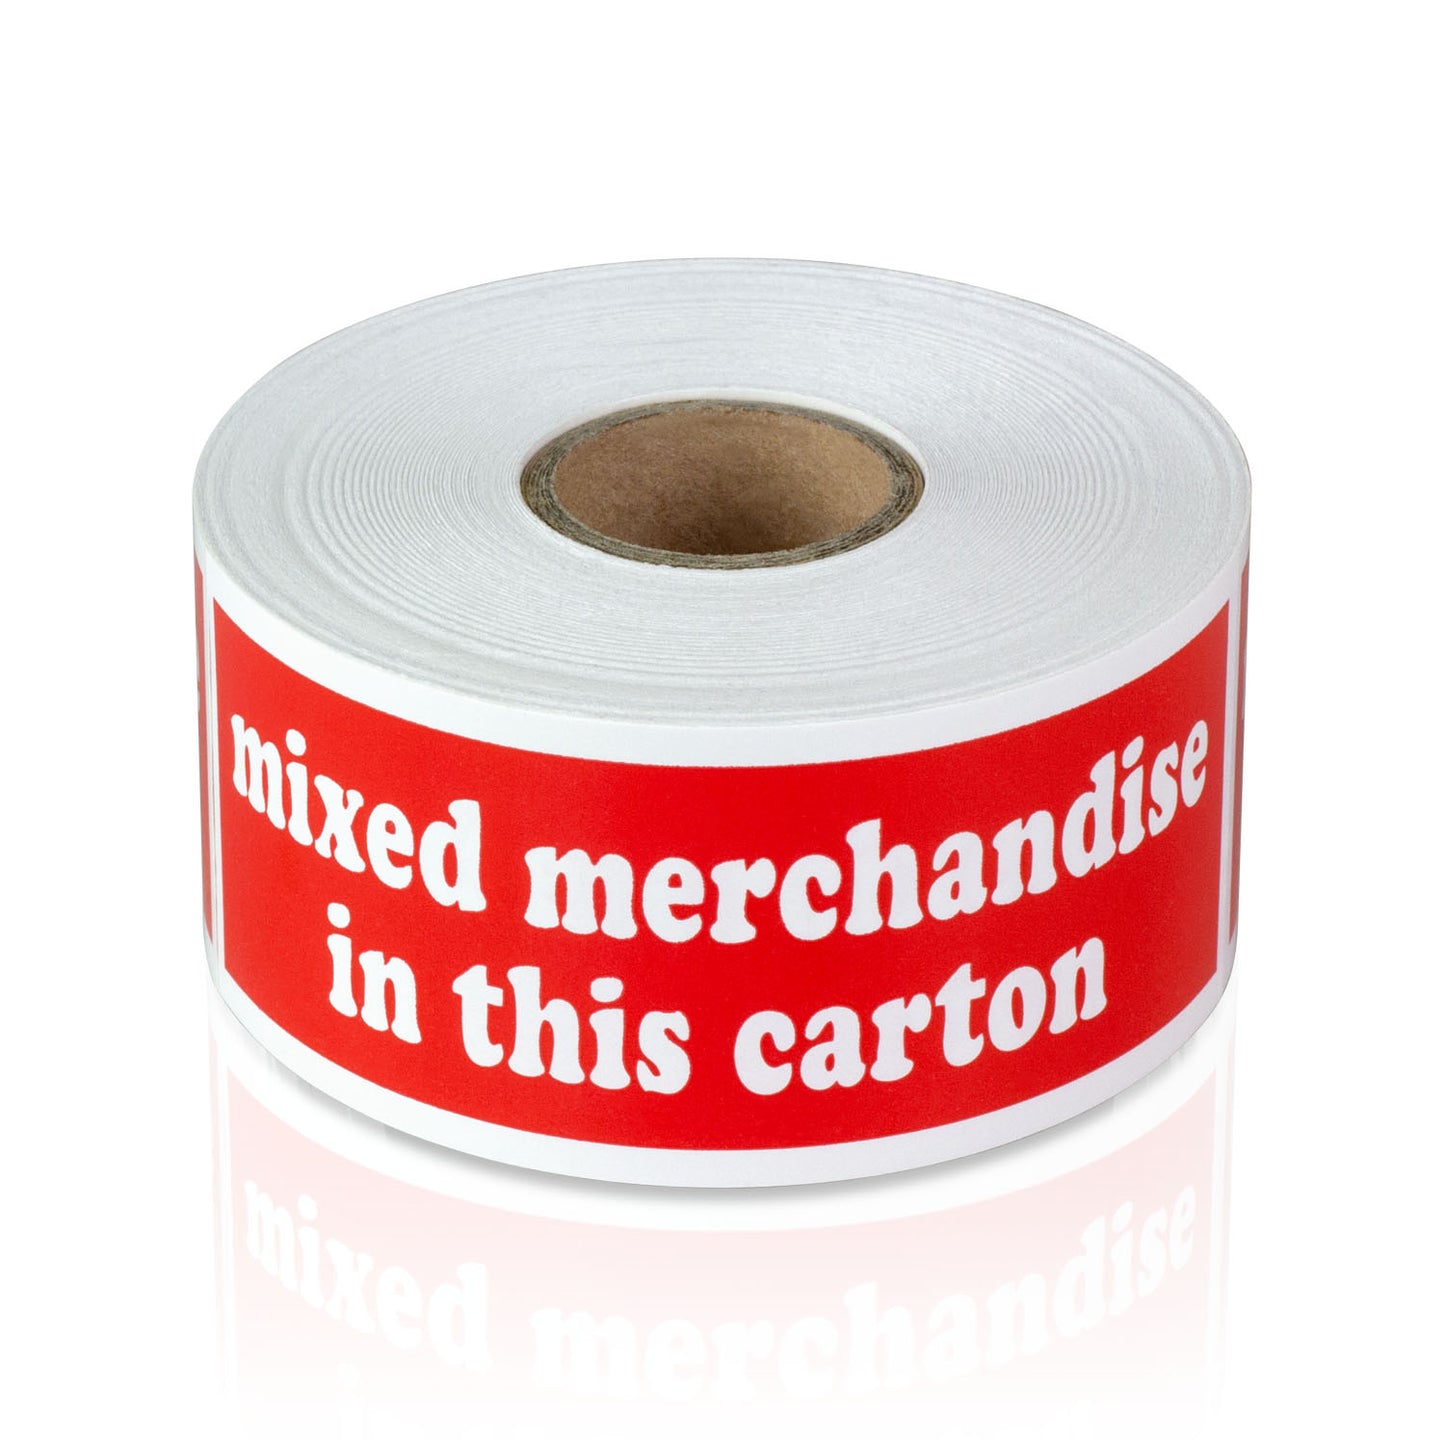 4 x 1.5 inch | Shipping & Handling: Mixed Merchandise in this Carton Stickers